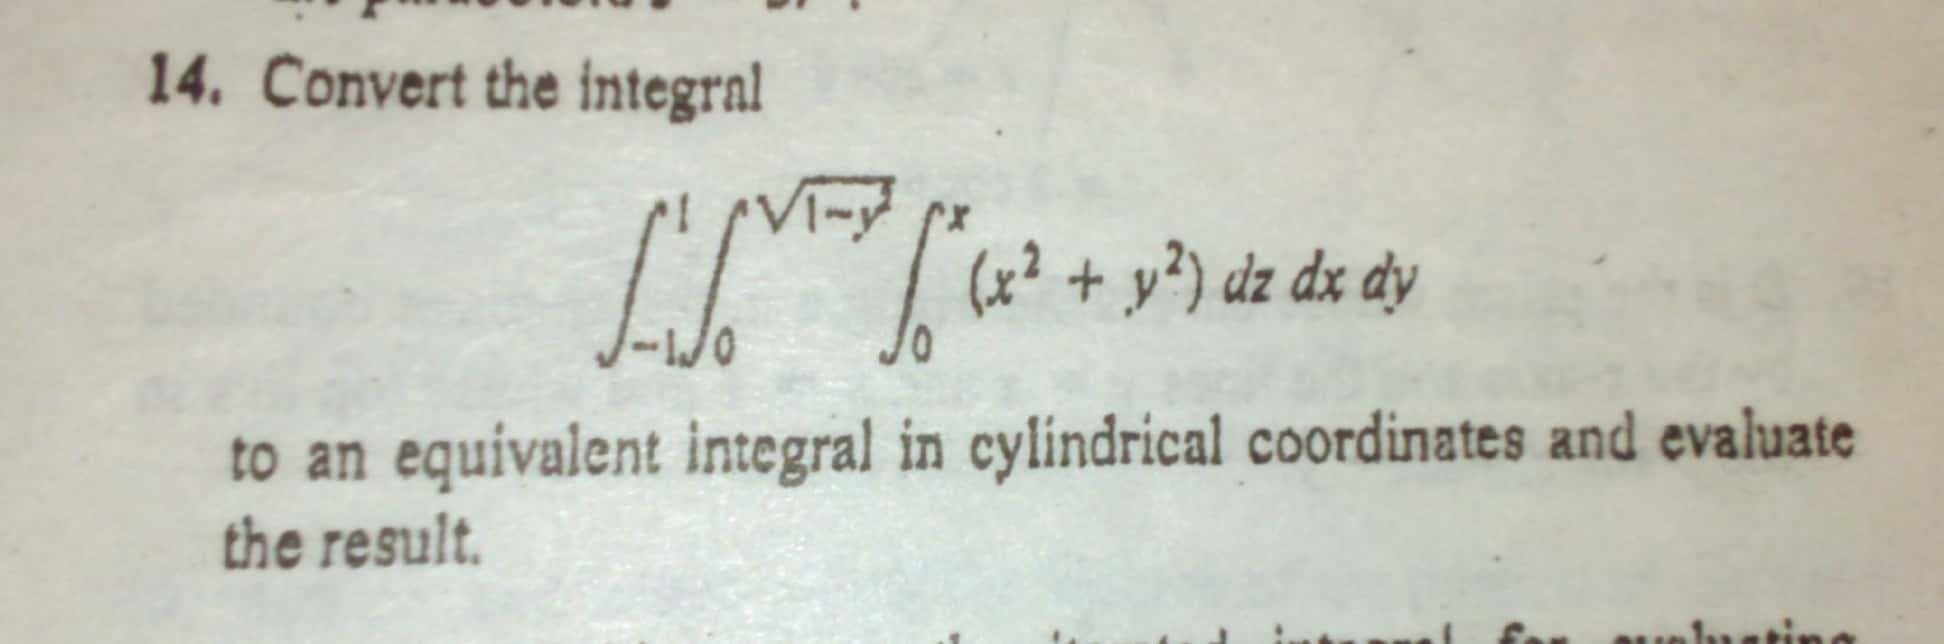 Convert the integral
(x² + y?) dz dx dy
to an equivalent integral in cylindrical coordinates and evaluate
the result.
